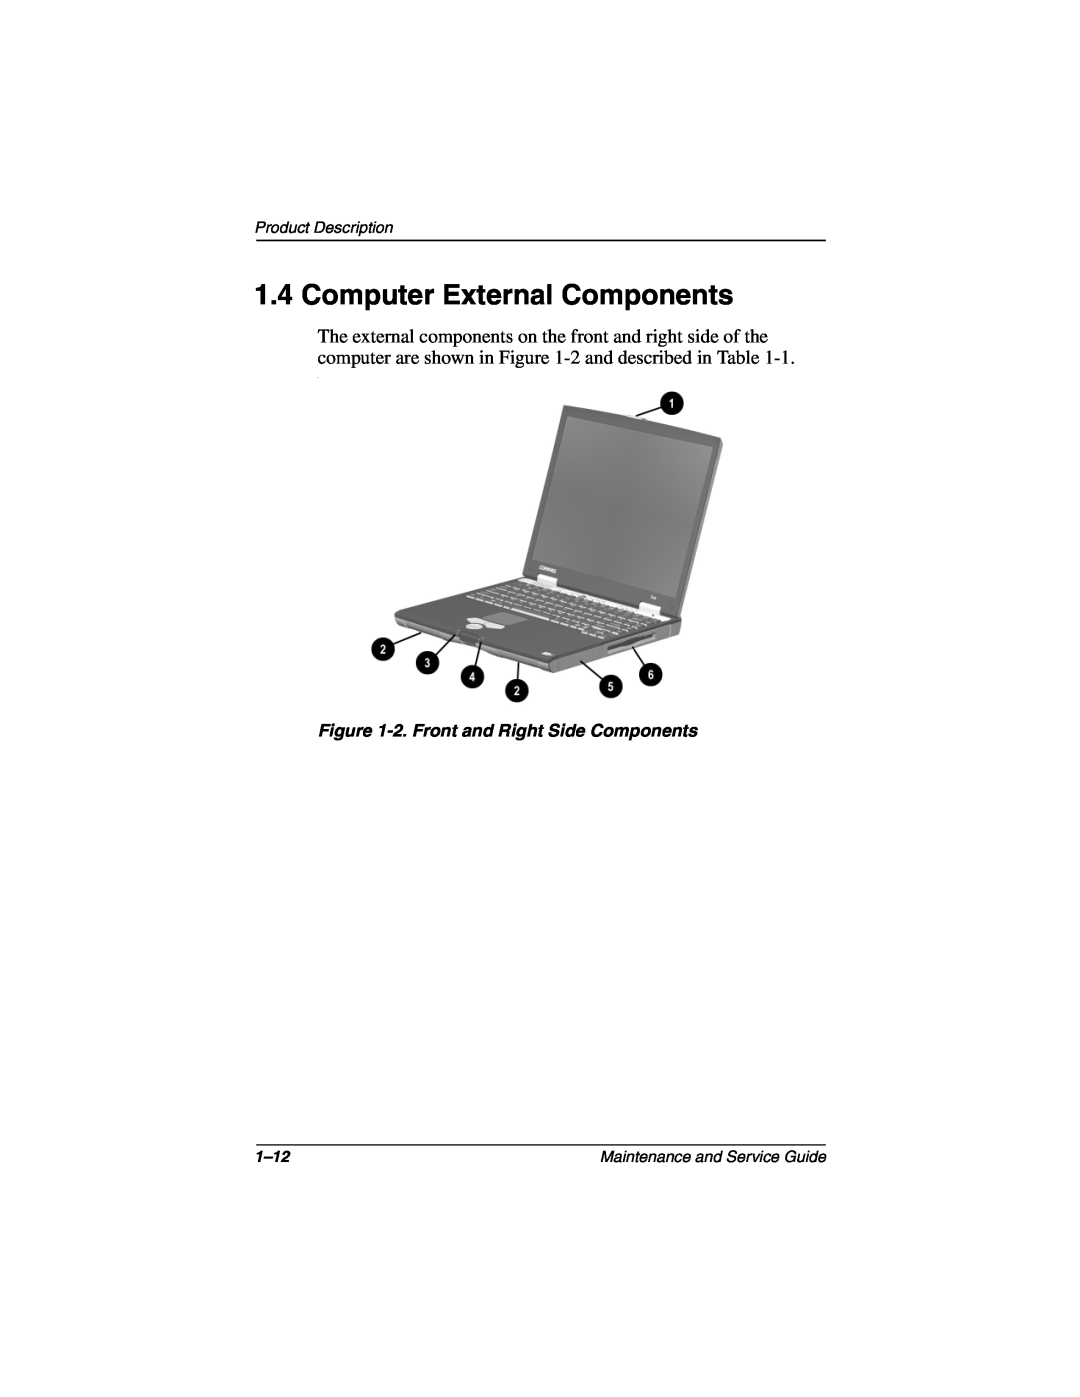 Compaq N160 manual Computer External Components, 2. Front and Right Side Components, Product Description, 1-12 